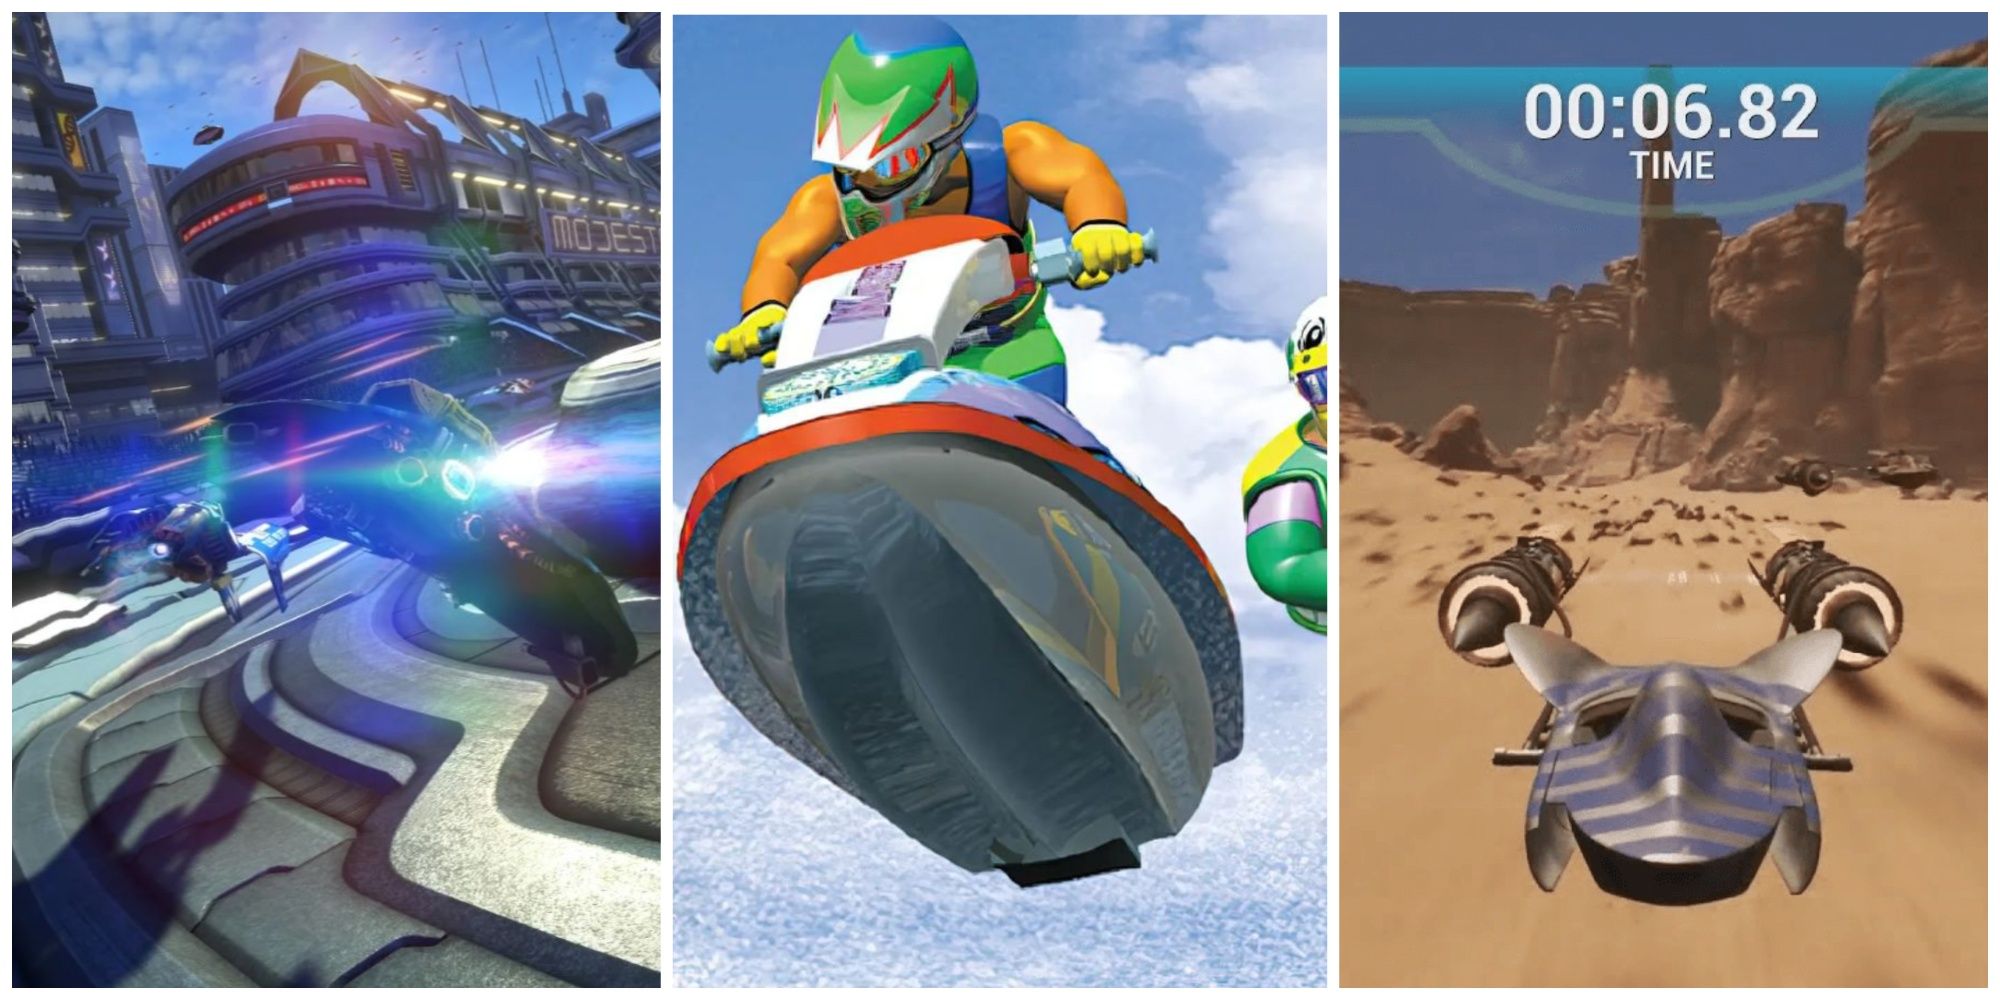 Wipeout Omega Collection, Wave Race 64, and Star Wars Episode 1 Racer